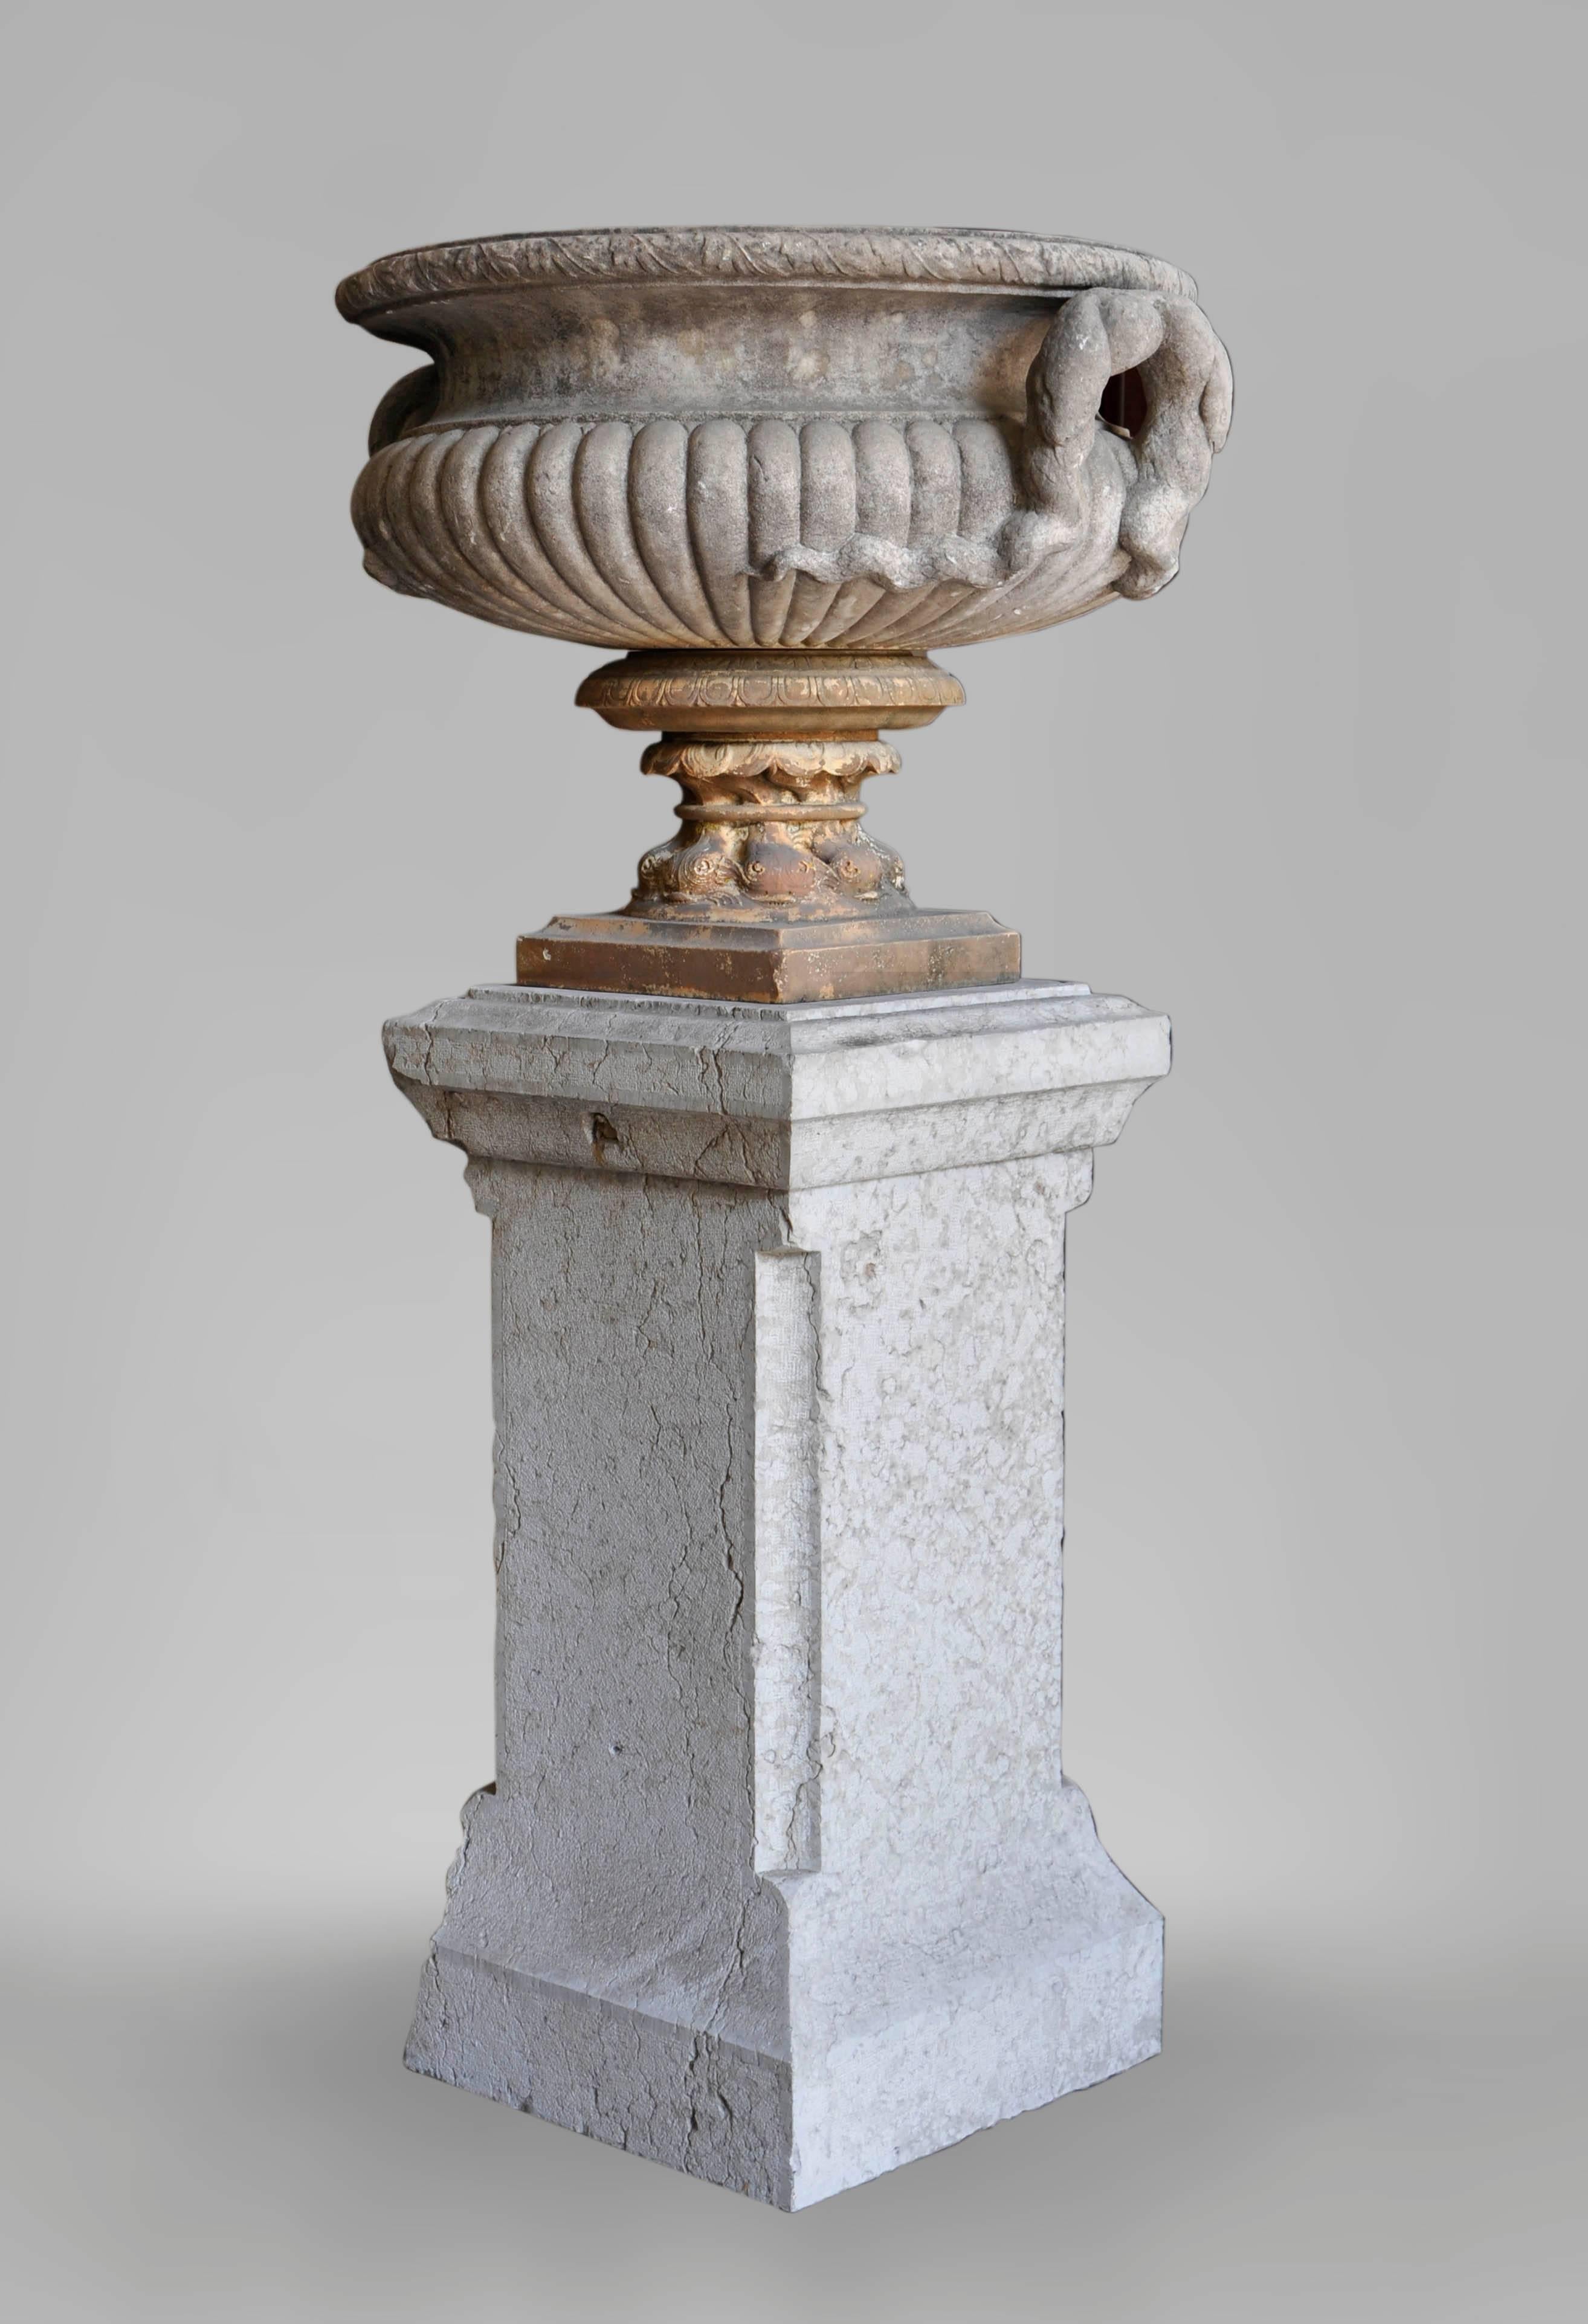 This set of four antique marble vases with terra-cotta pedestals was realized in the late 18th century or early 19th century in Italy. The vases' paunch are fluted whereas handles are figuring snakes in a high relief sculpture. The Medici style